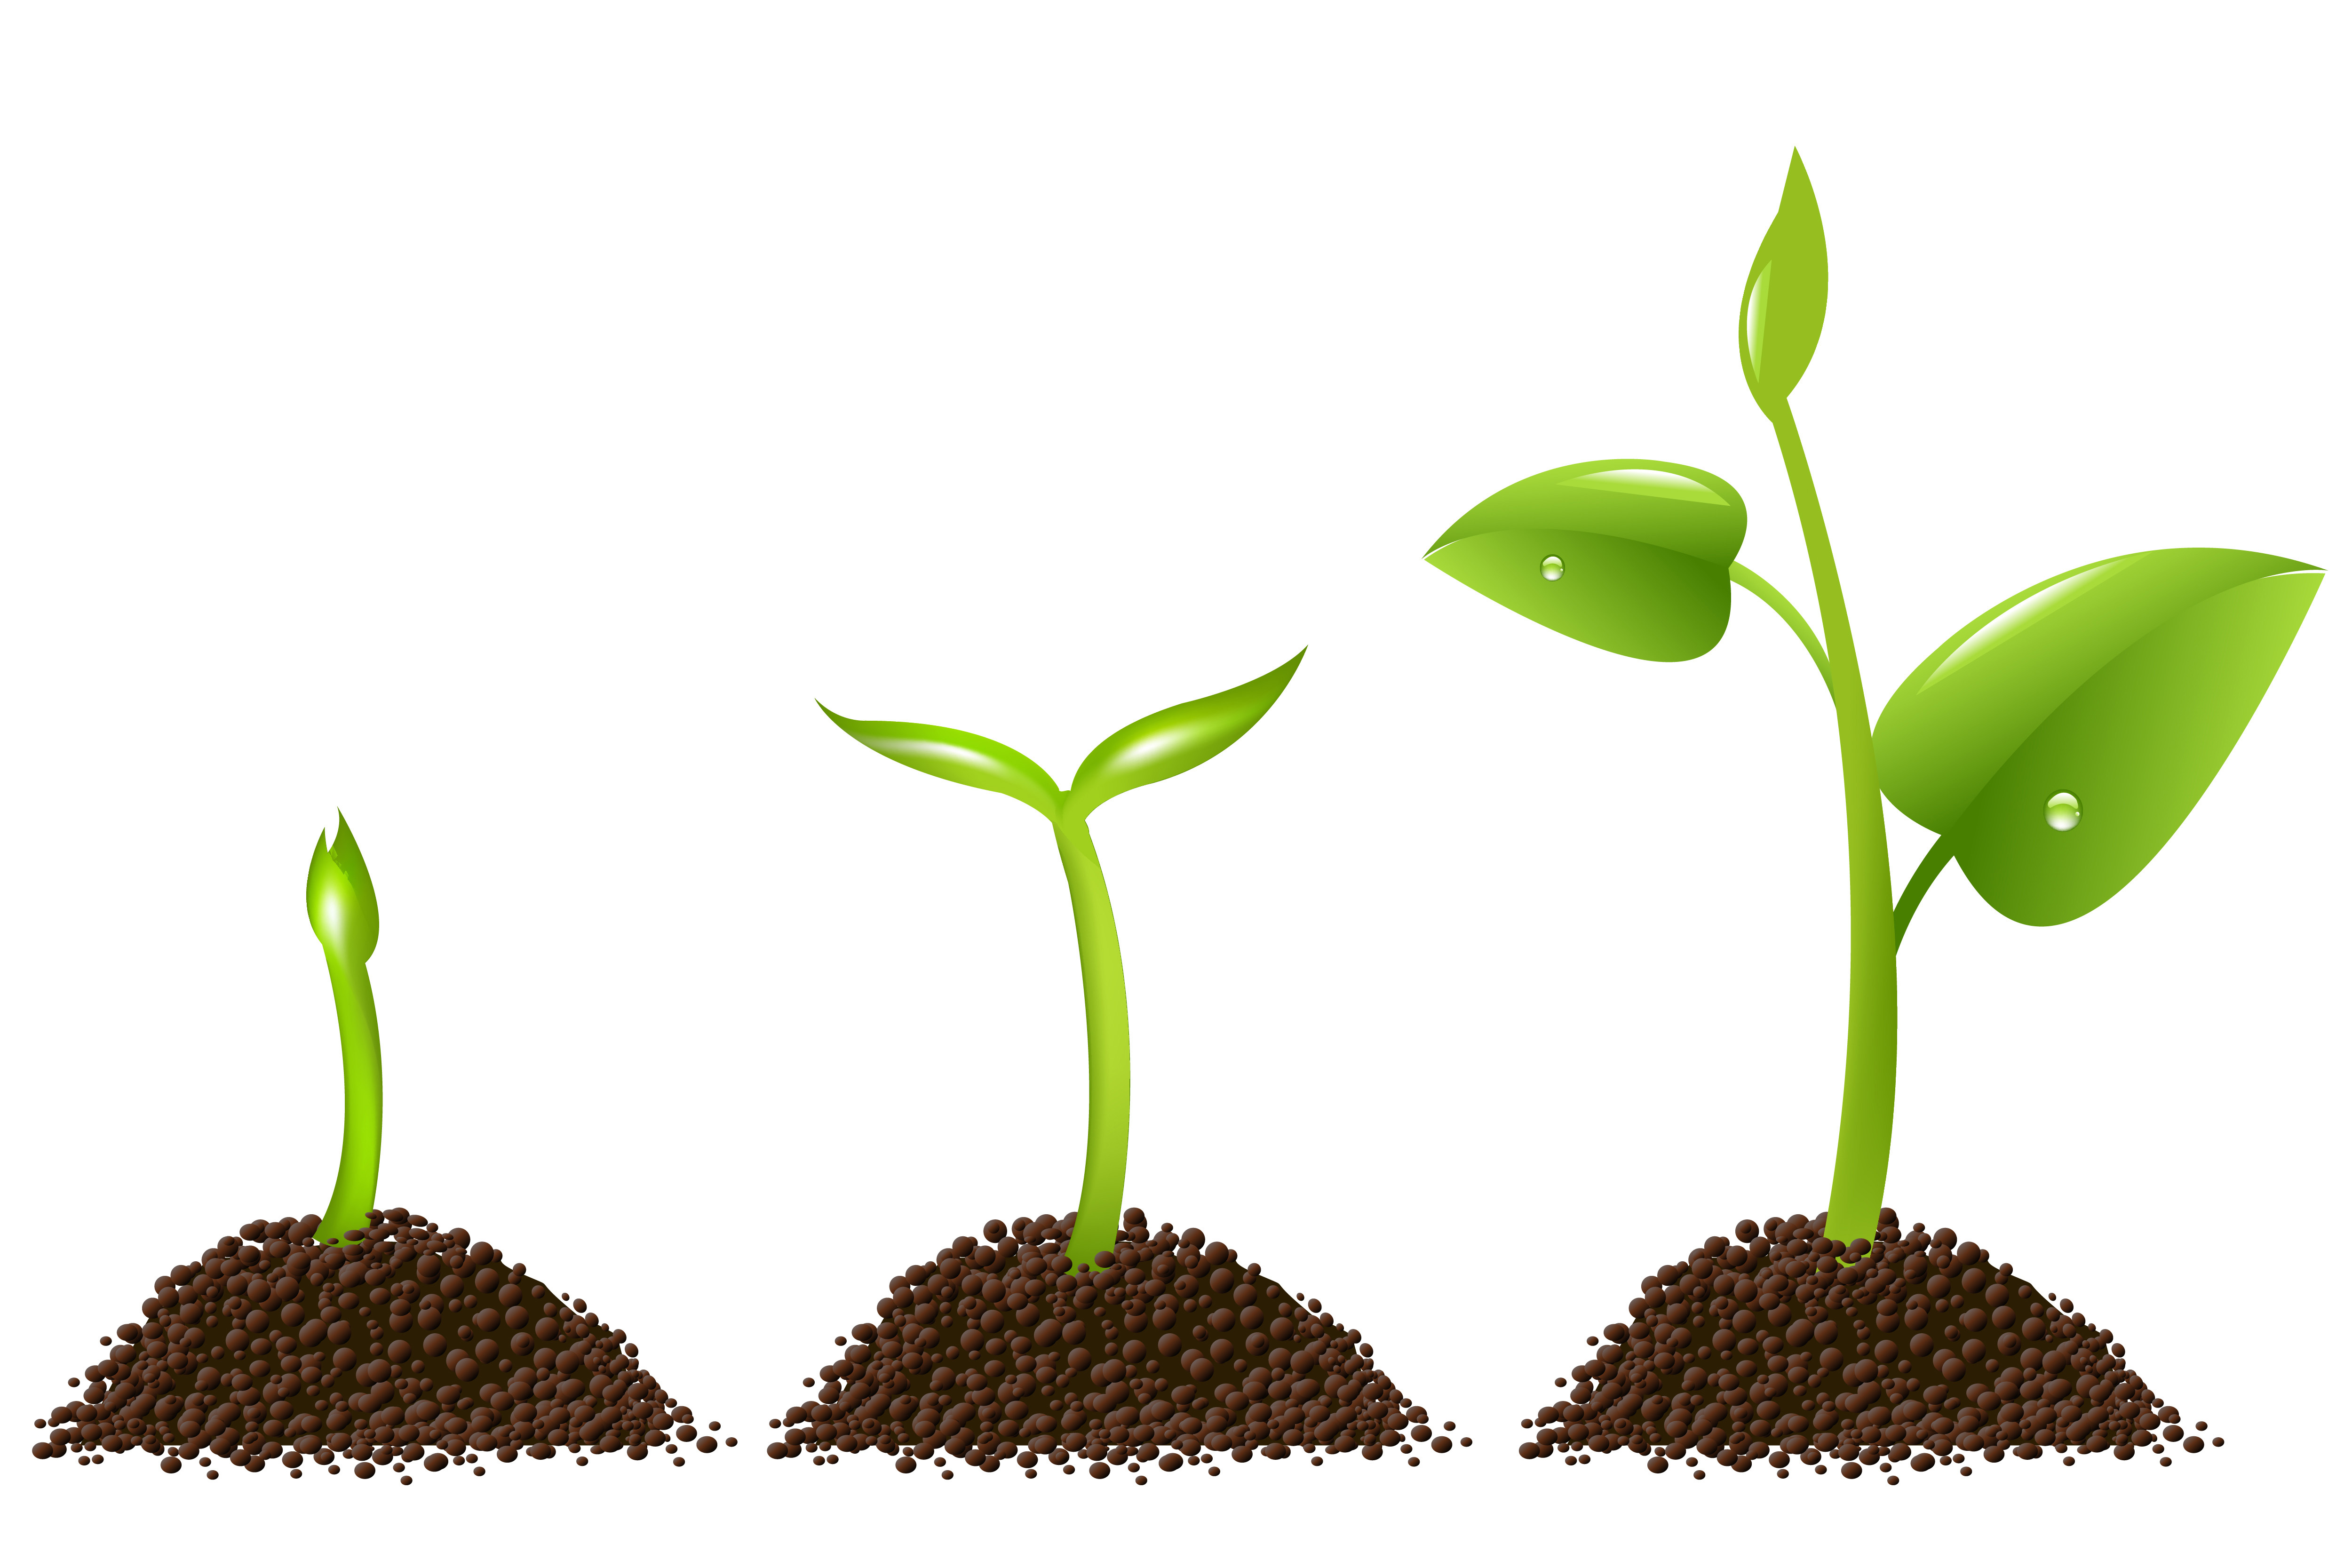 Seedling clipart spring. Sprout free download best